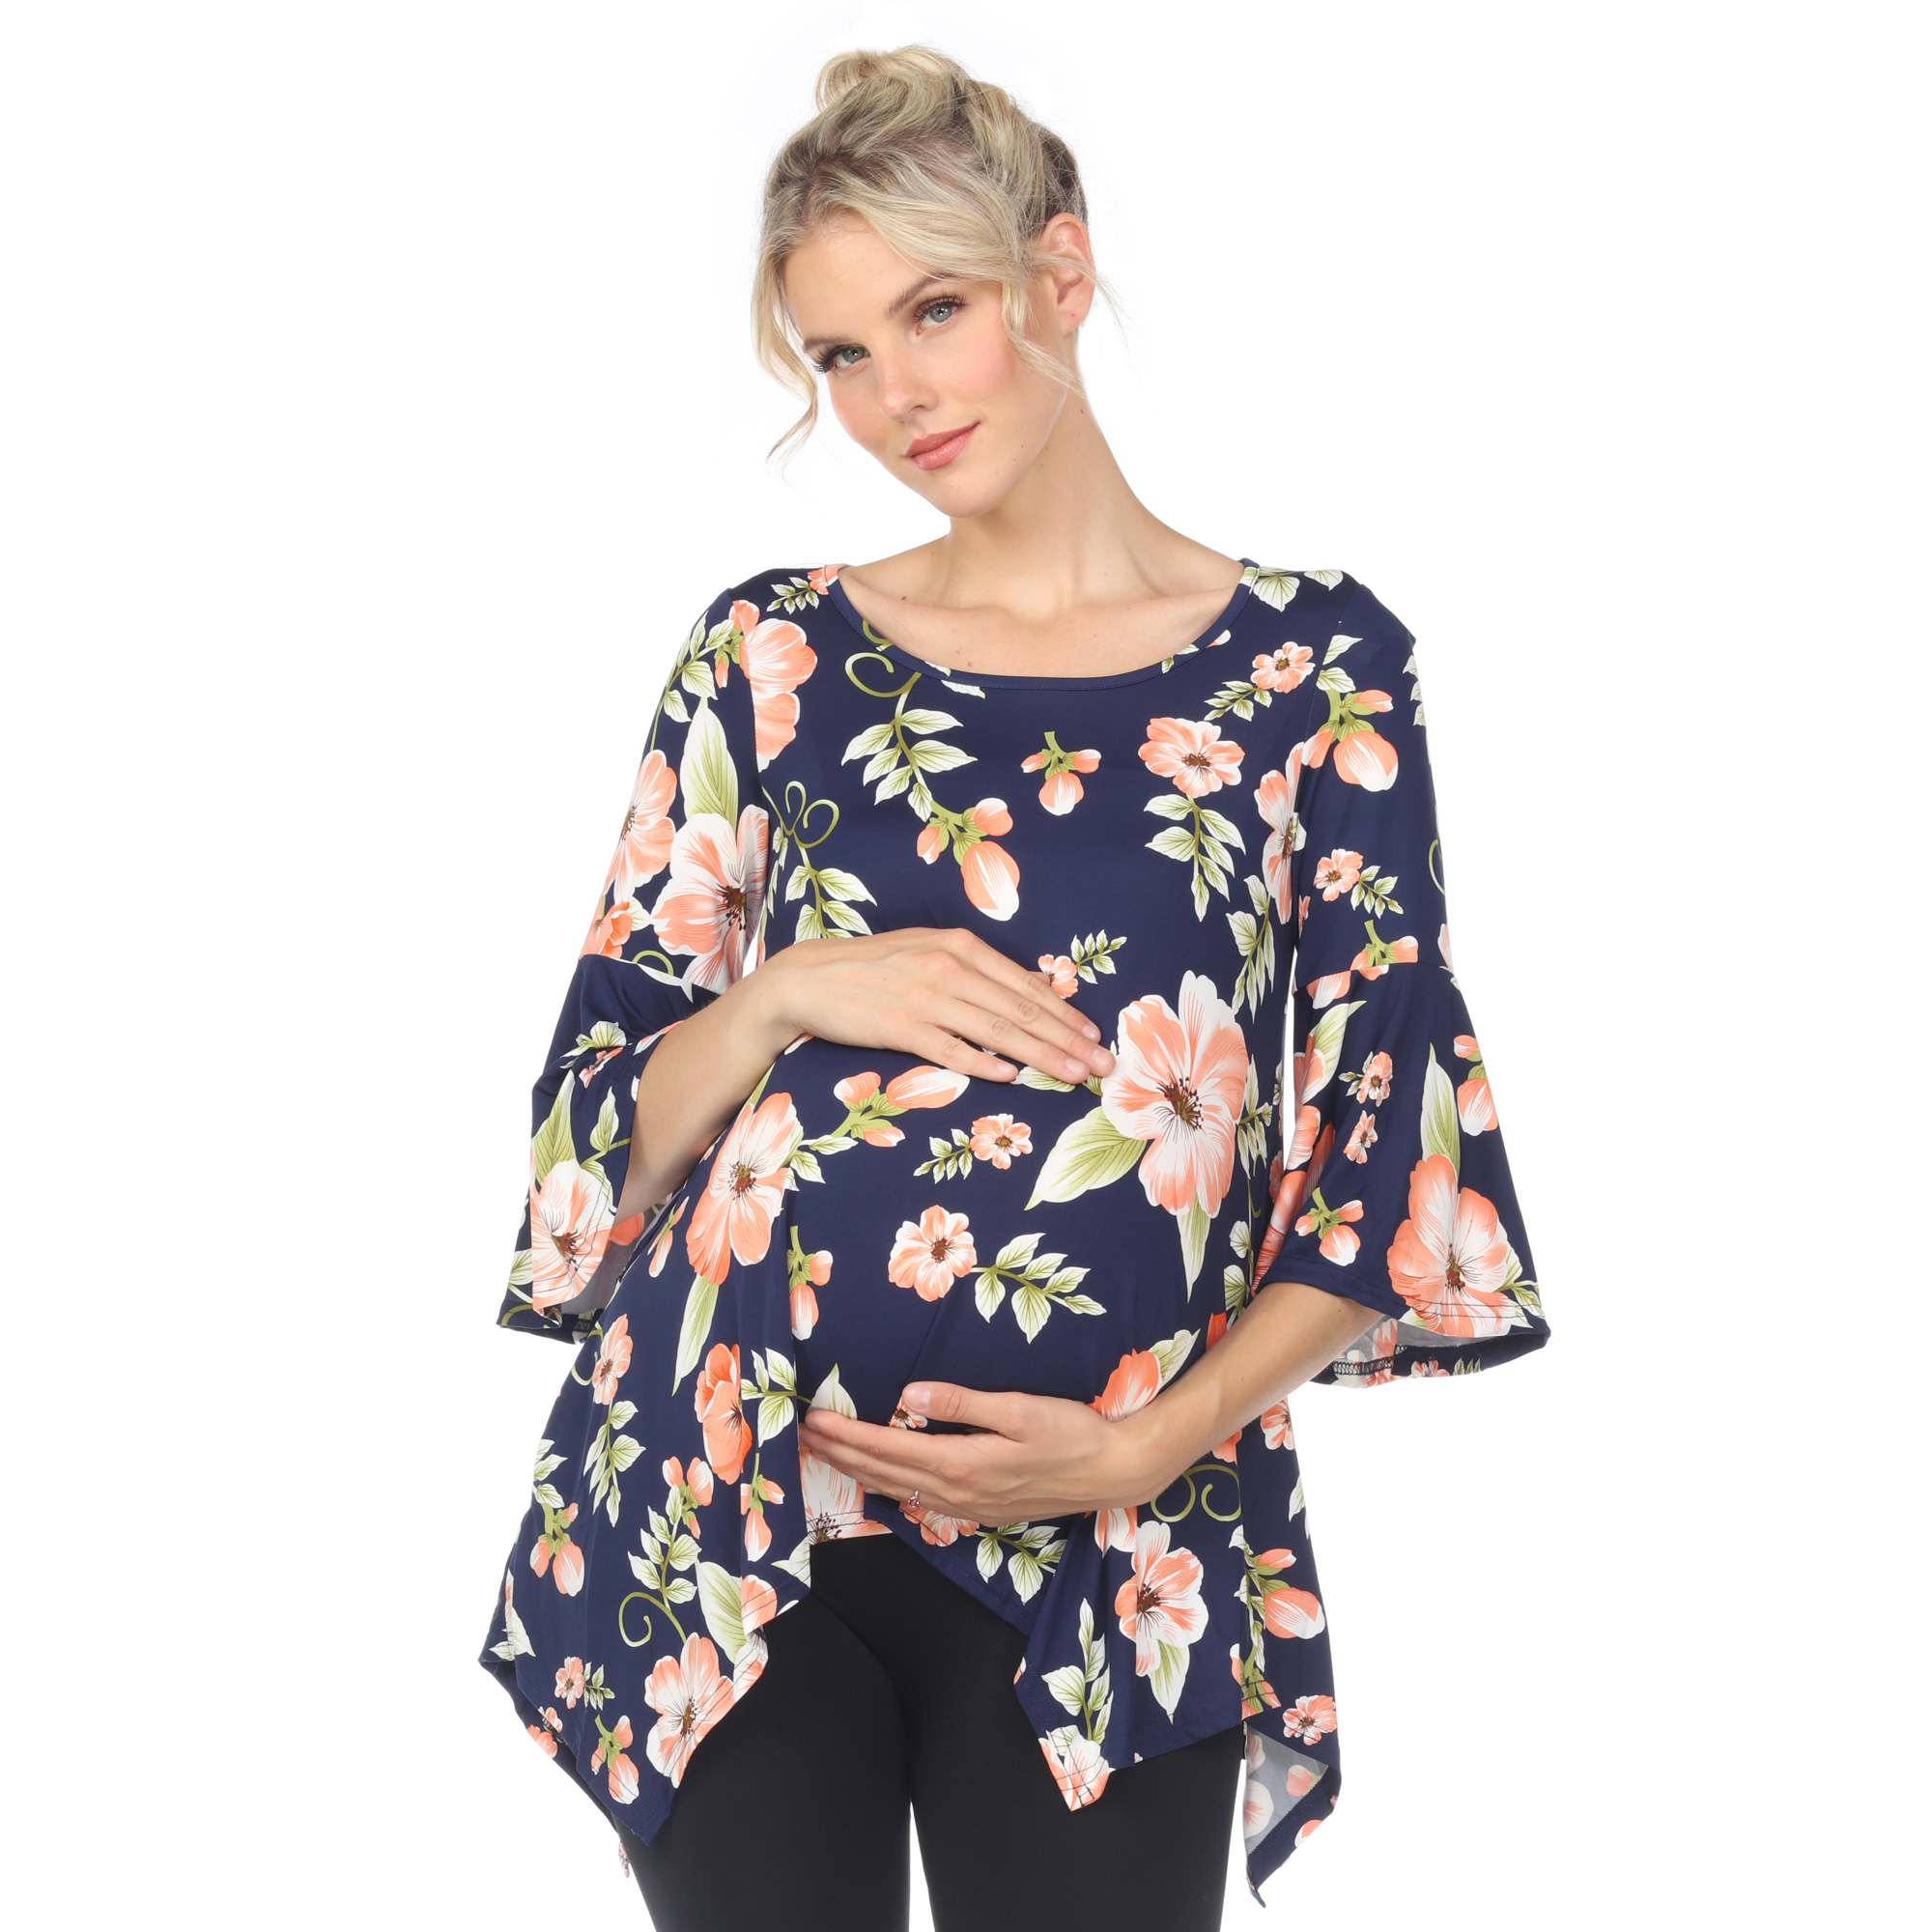 White Mark Women's Maternity Floral Print Quarter Sleeve Tunic Top With Pockets - Peach Flower, Small